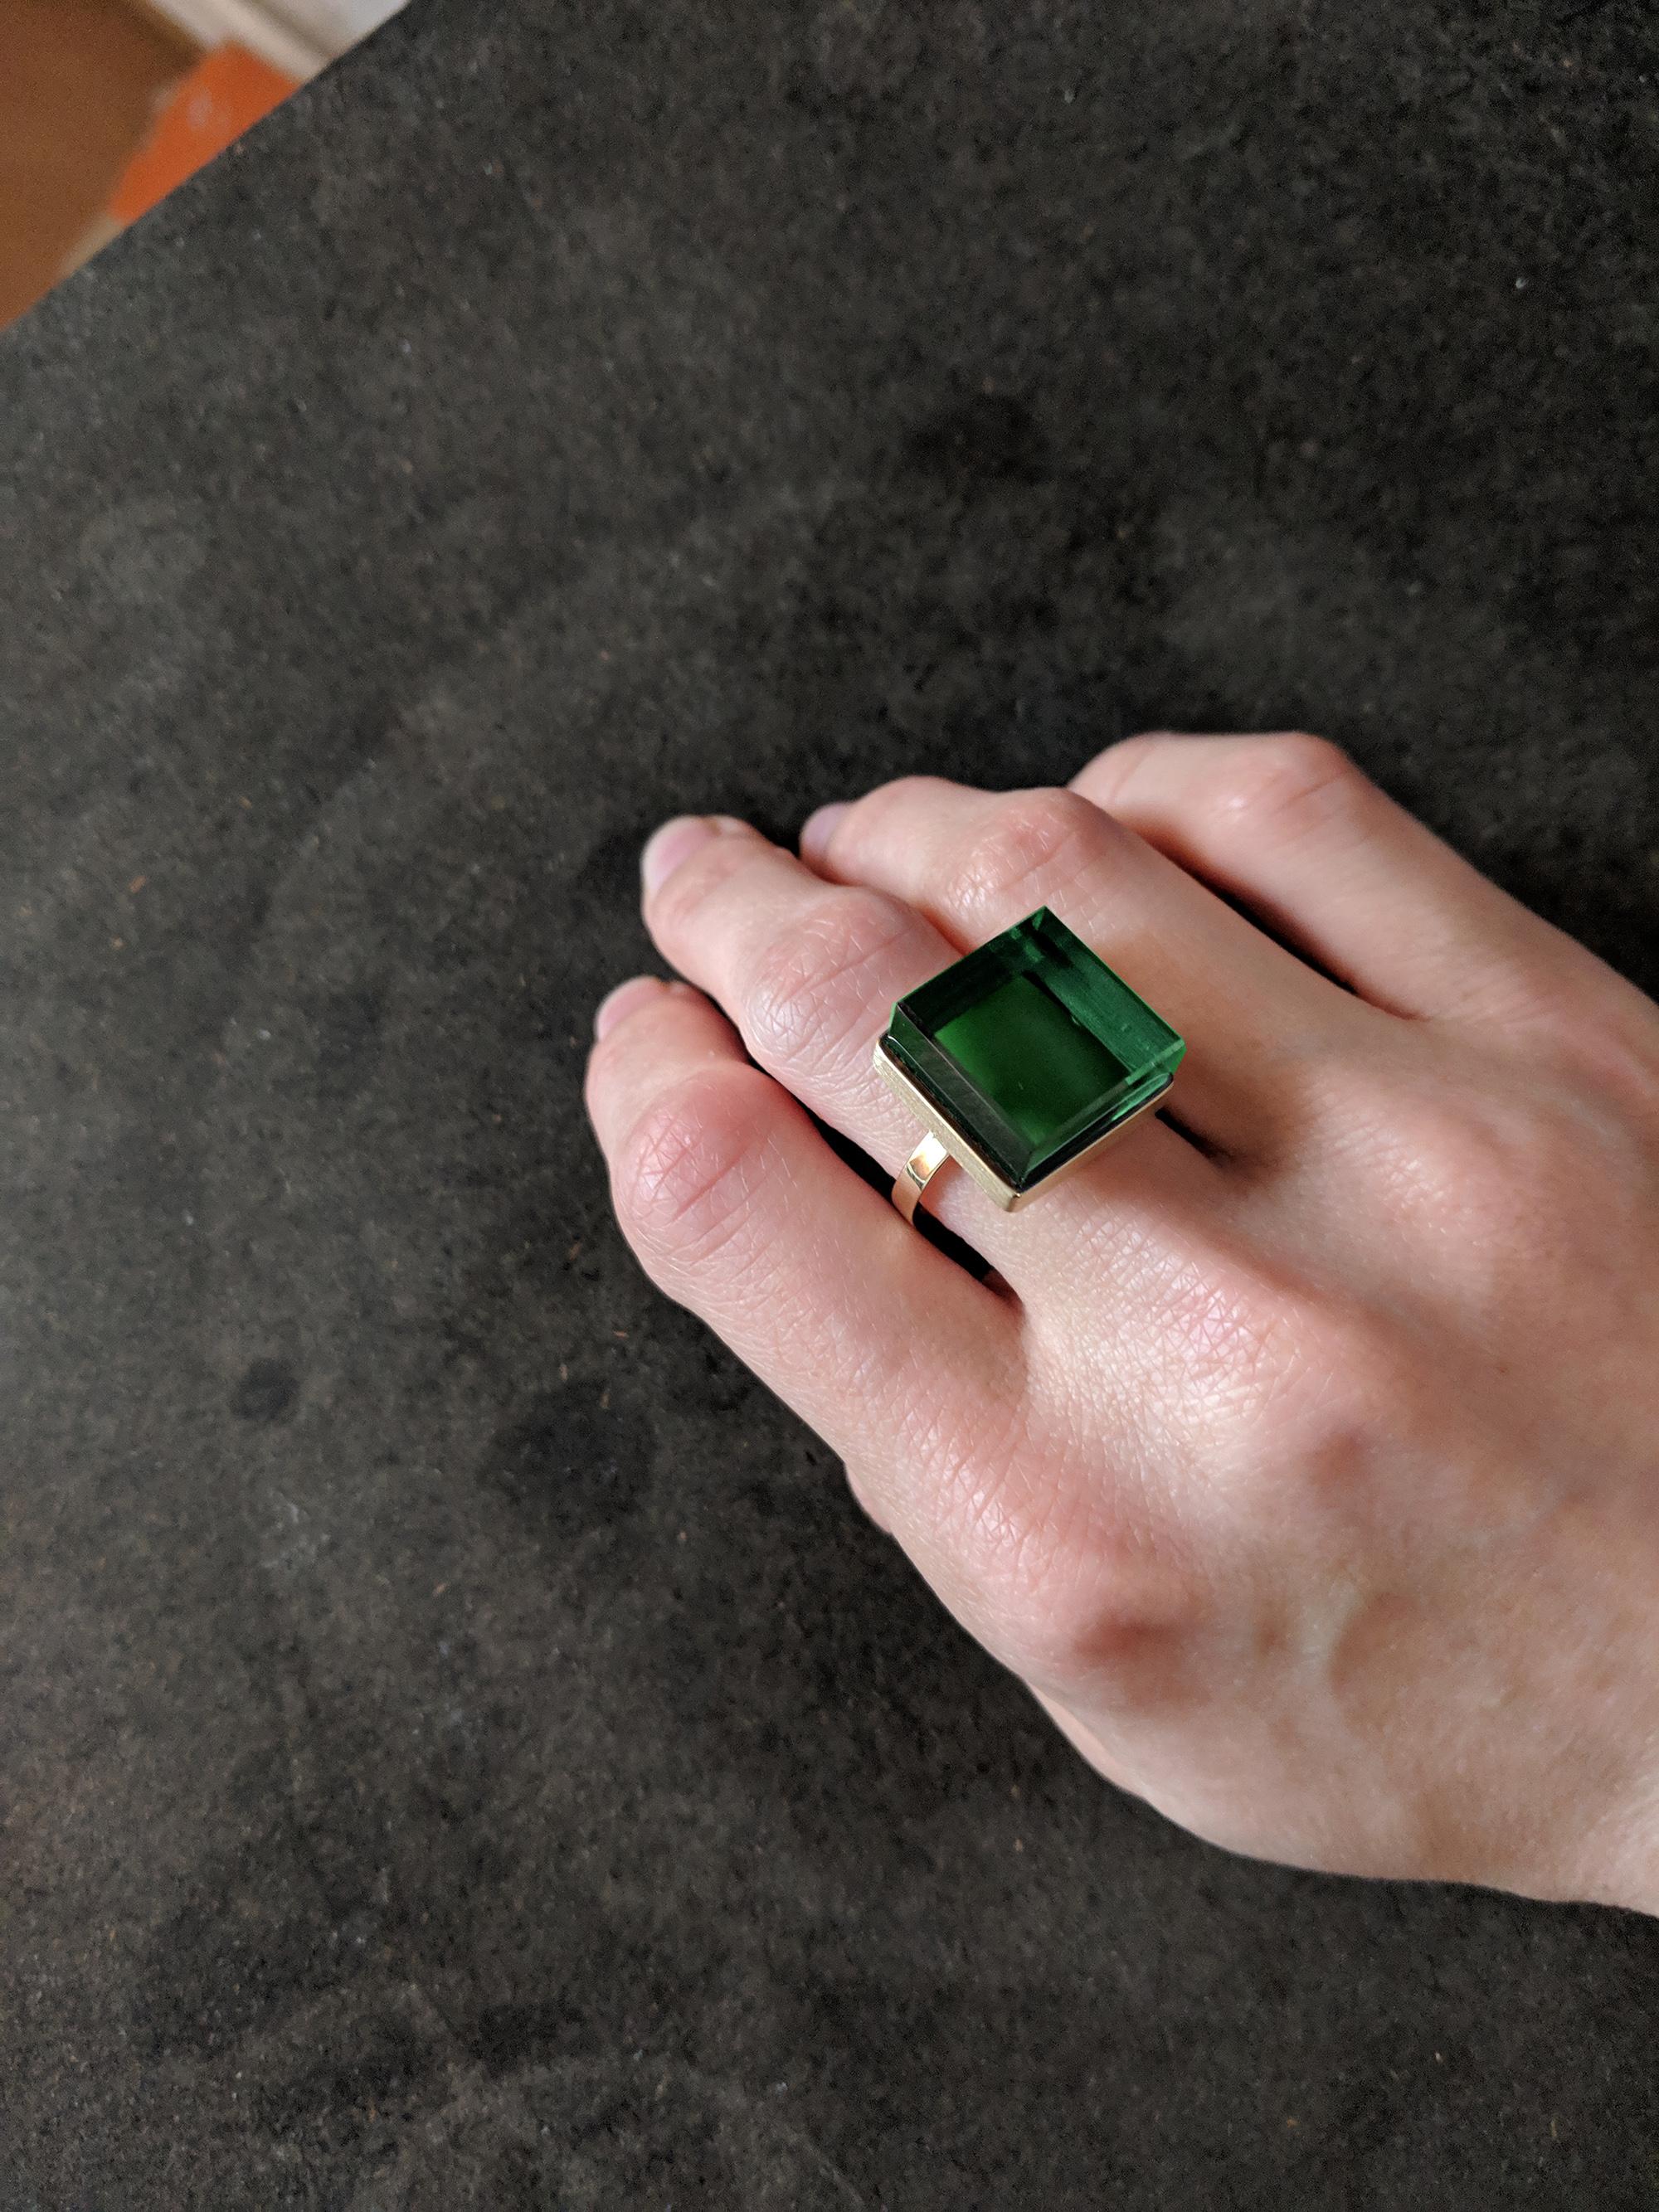 This ring is in 18 Karat rose gold with 15x15x8 mm green grown quartz. The collection was published in Harper's Bazaar and Vogue UA. 

The ring reflects the art deco spirit and fits to women and men. This ring inspires the architects, designers and